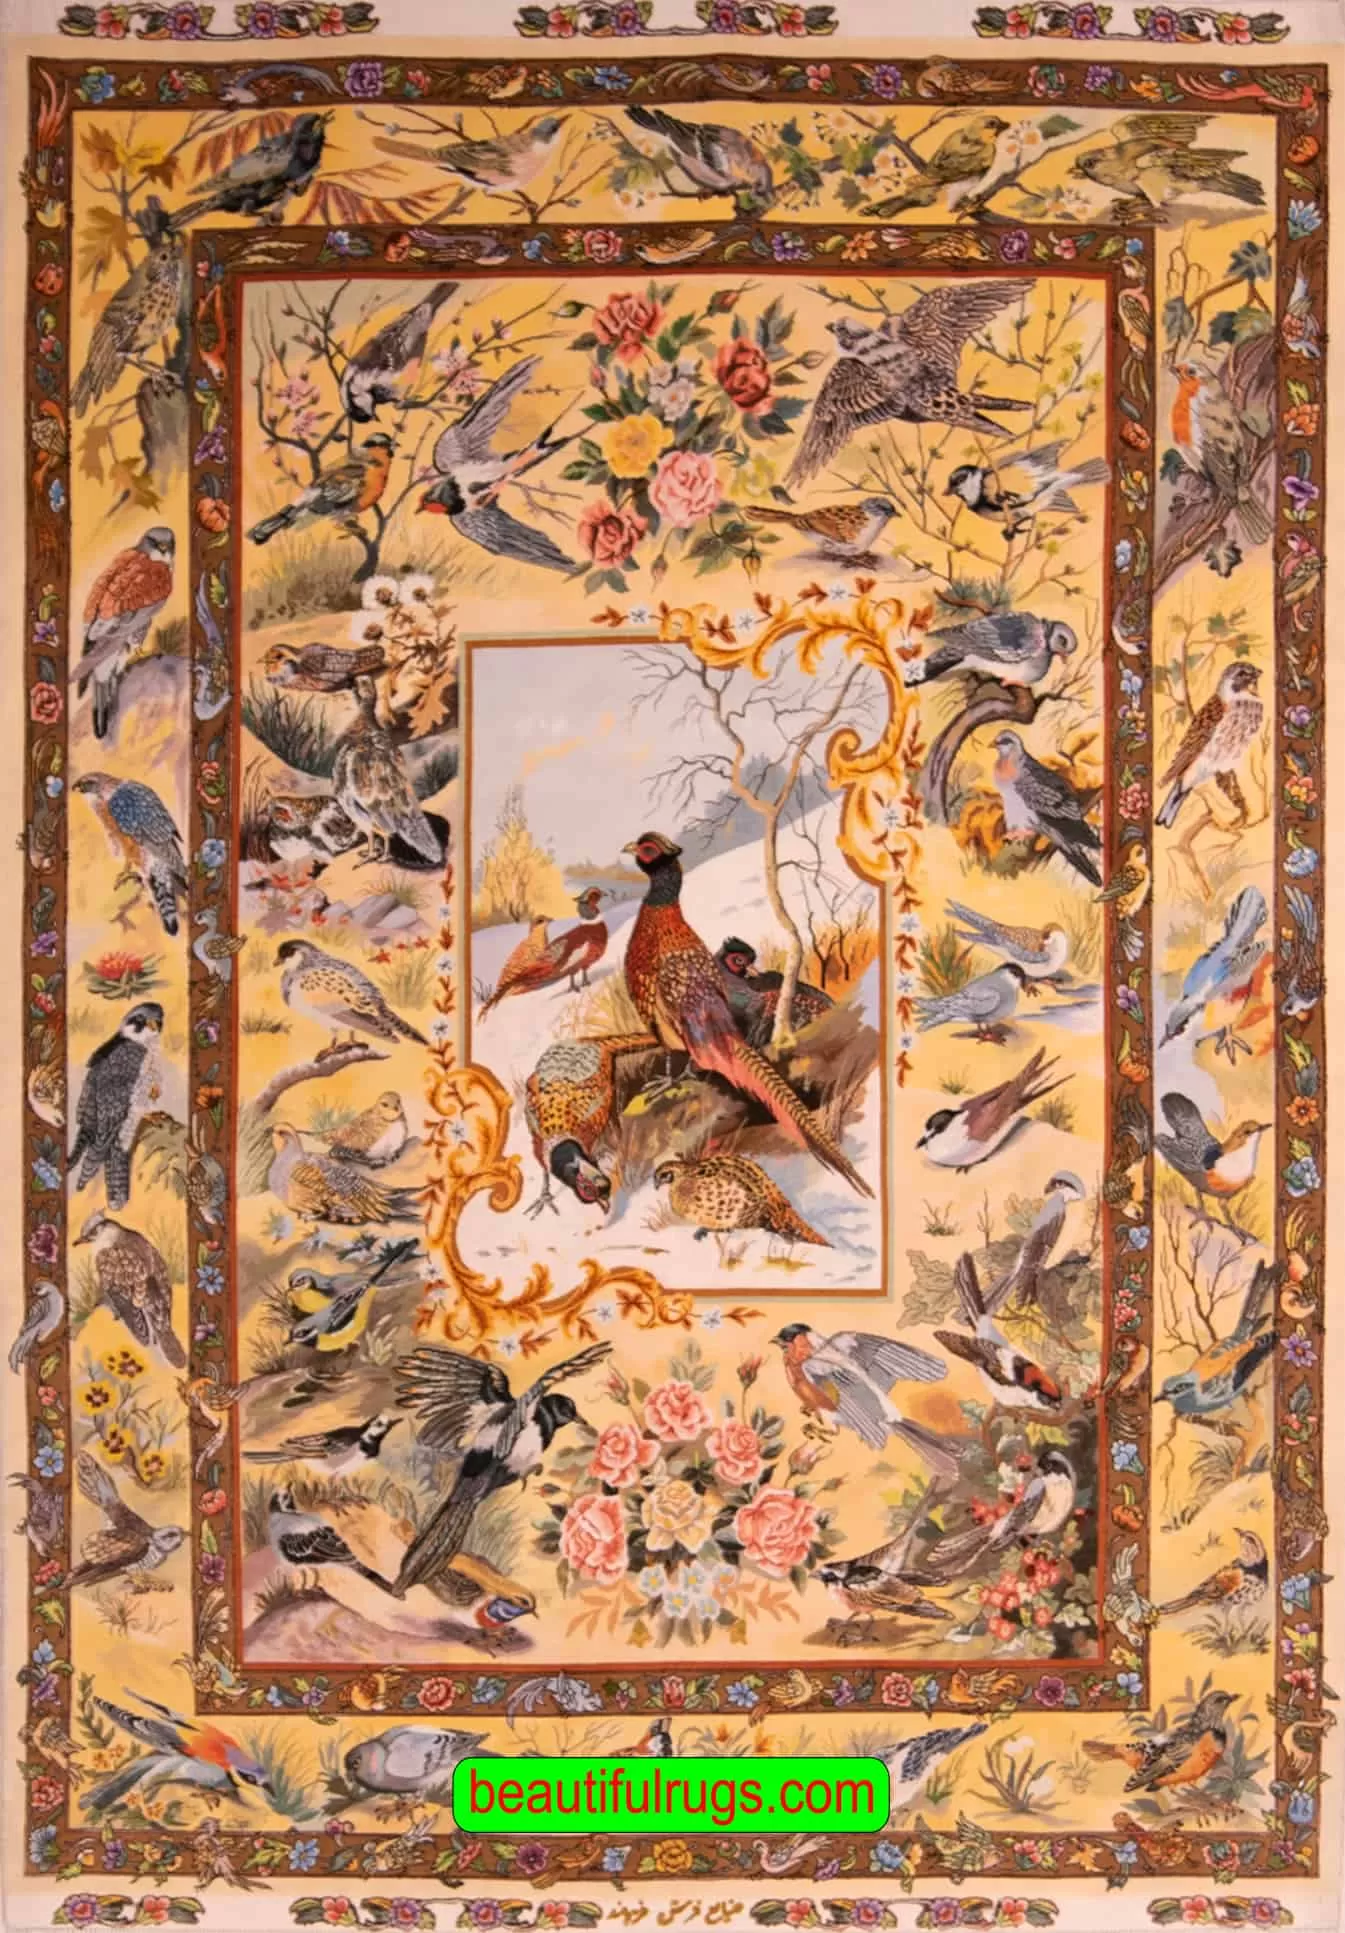 Hand Knotted Persian Tabriz rug, Bevy of Birds Rug, Scenery Rug, Artwork of Iran Rugs, Festival of Birds, size 5x7, main image